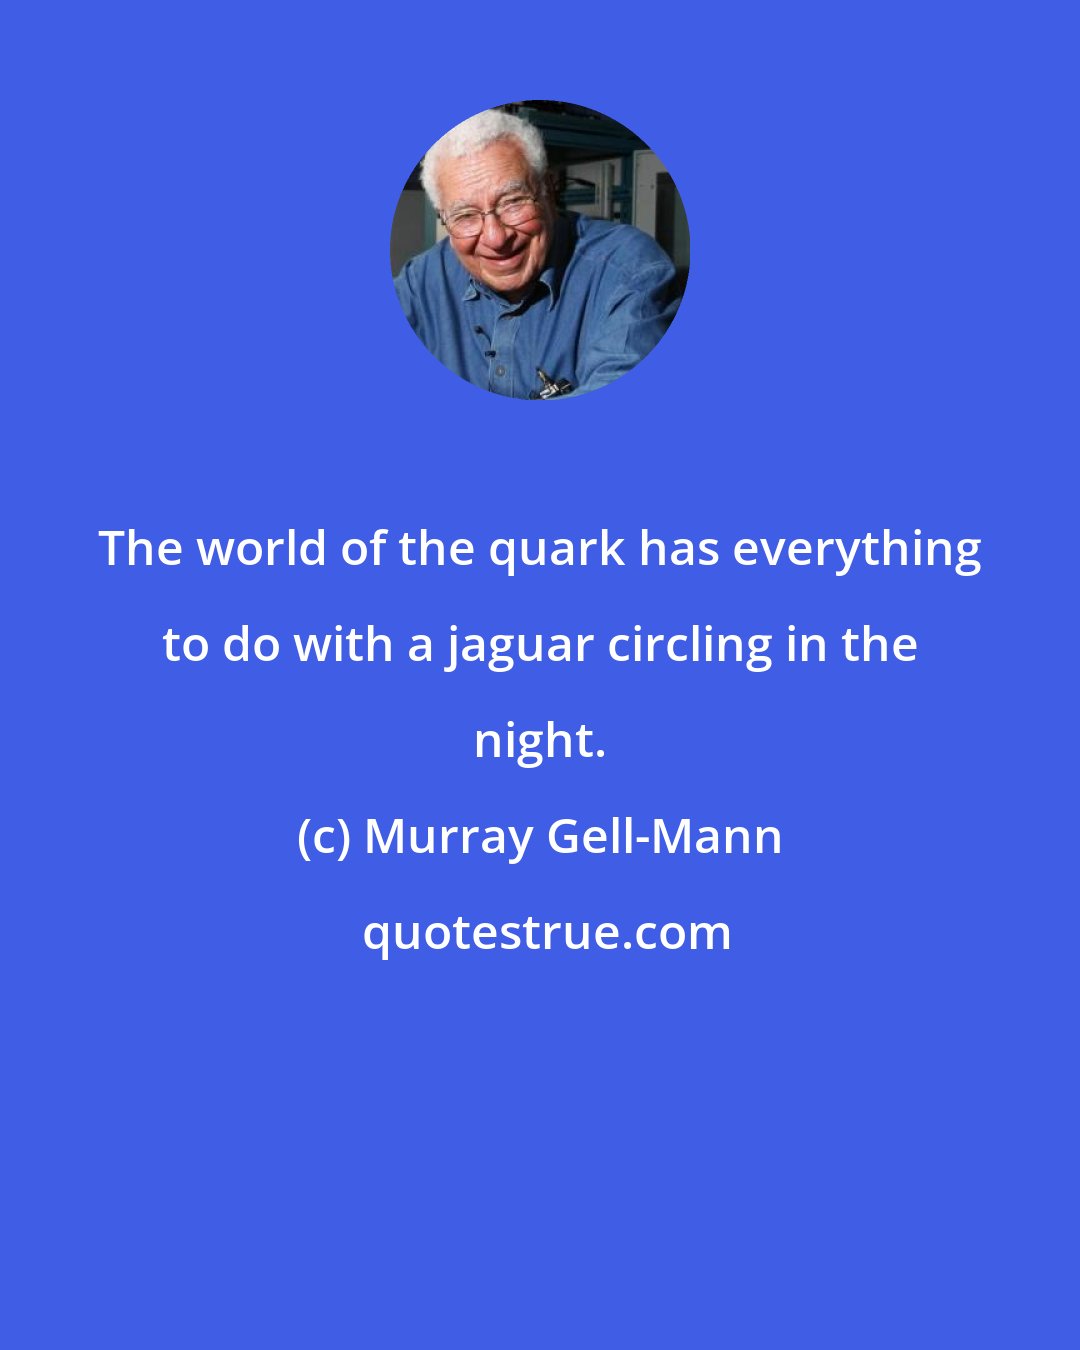 Murray Gell-Mann: The world of the quark has everything to do with a jaguar circling in the night.